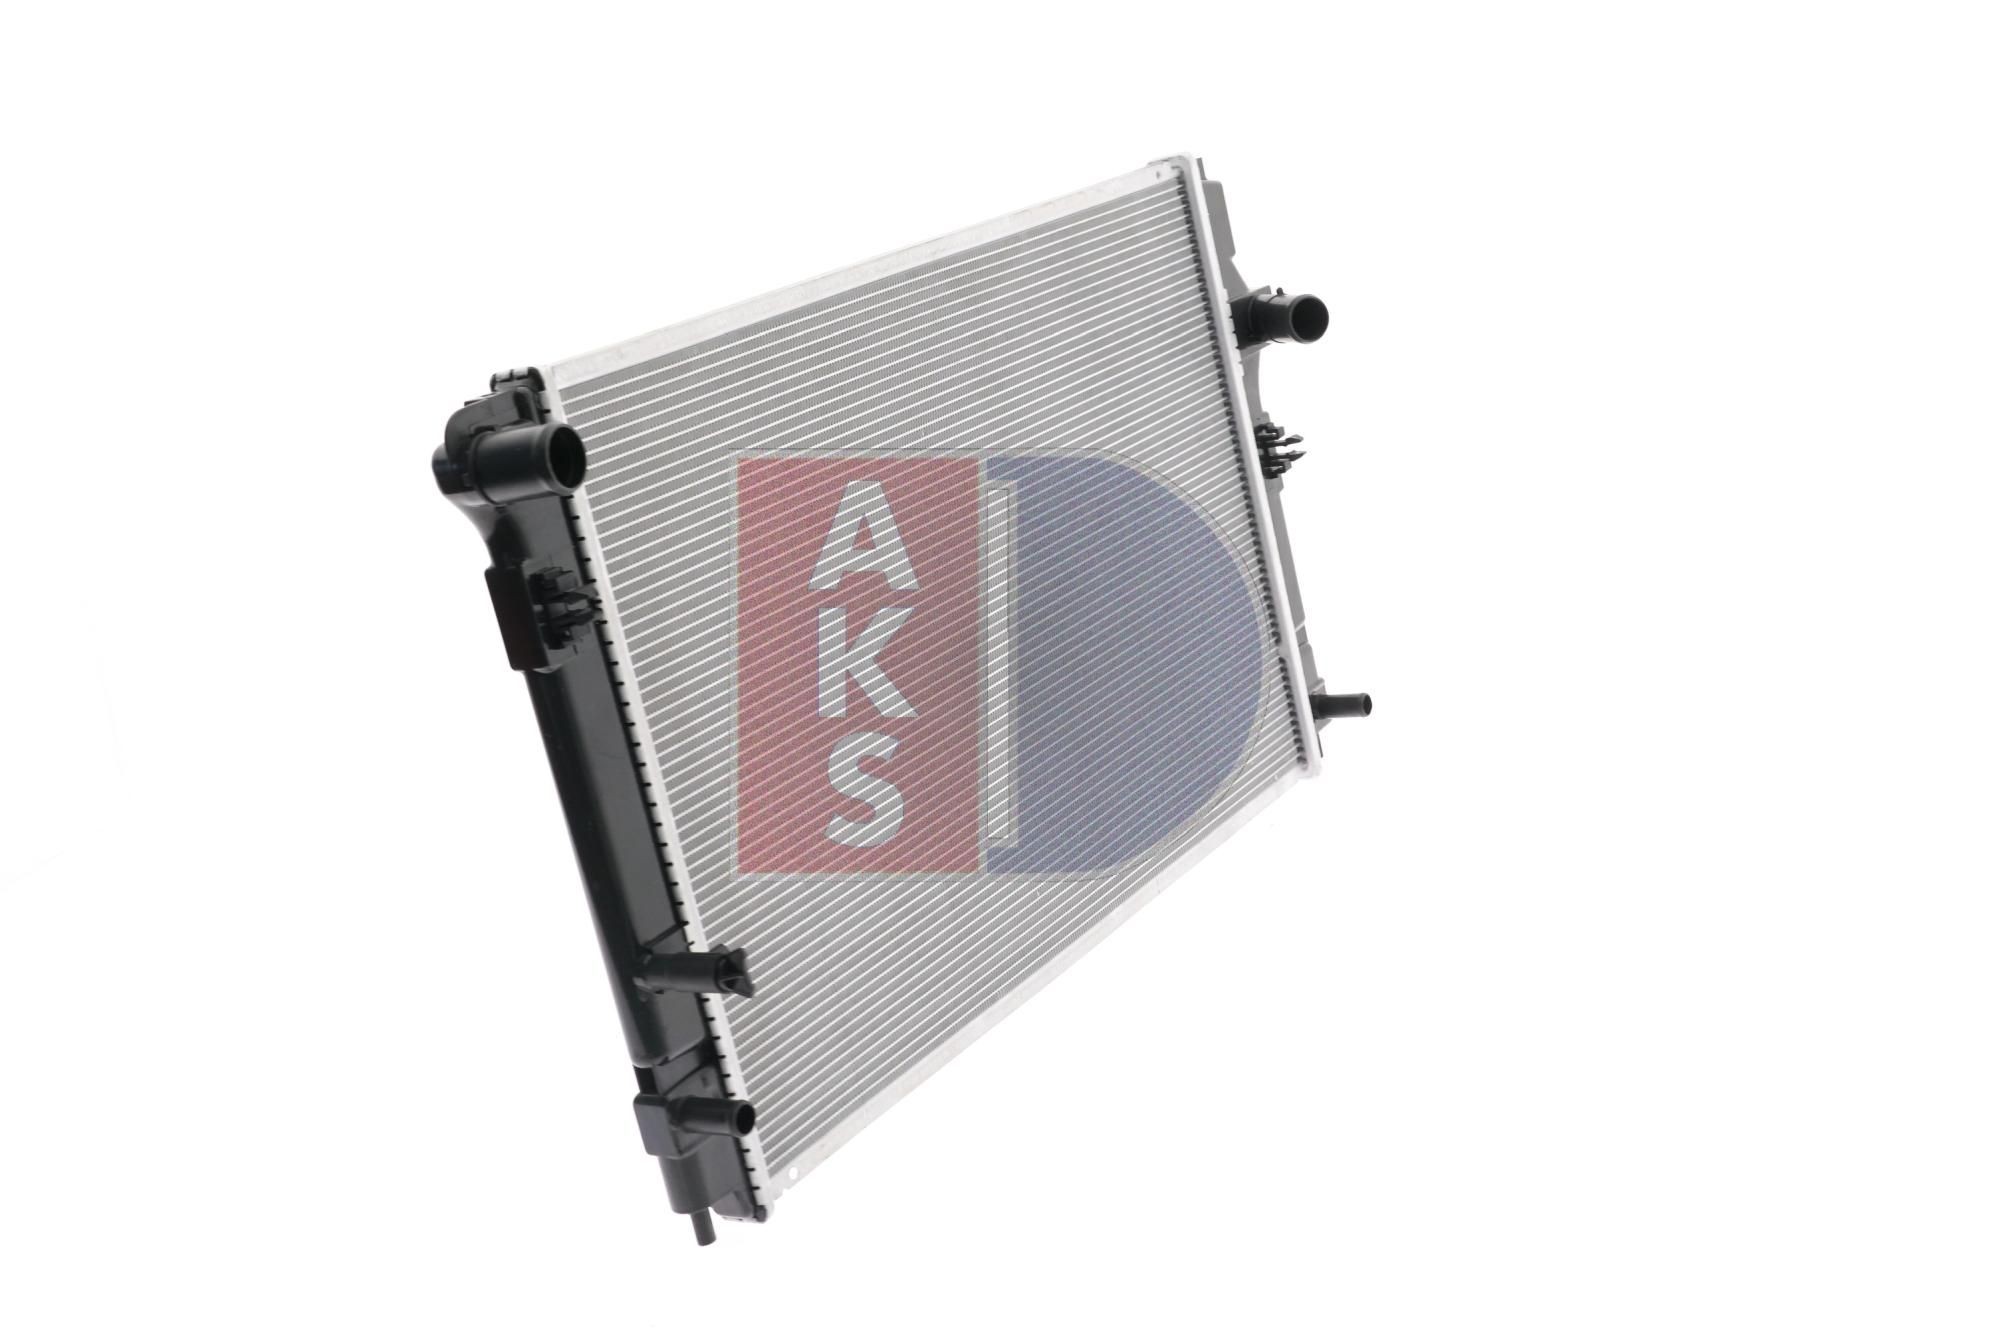 210255N Radiator 210255N AKS DASIS for vehicles with/without air conditioning, 600 x 426 x 16 mm, Automatic Transmission, Brazed cooling fins